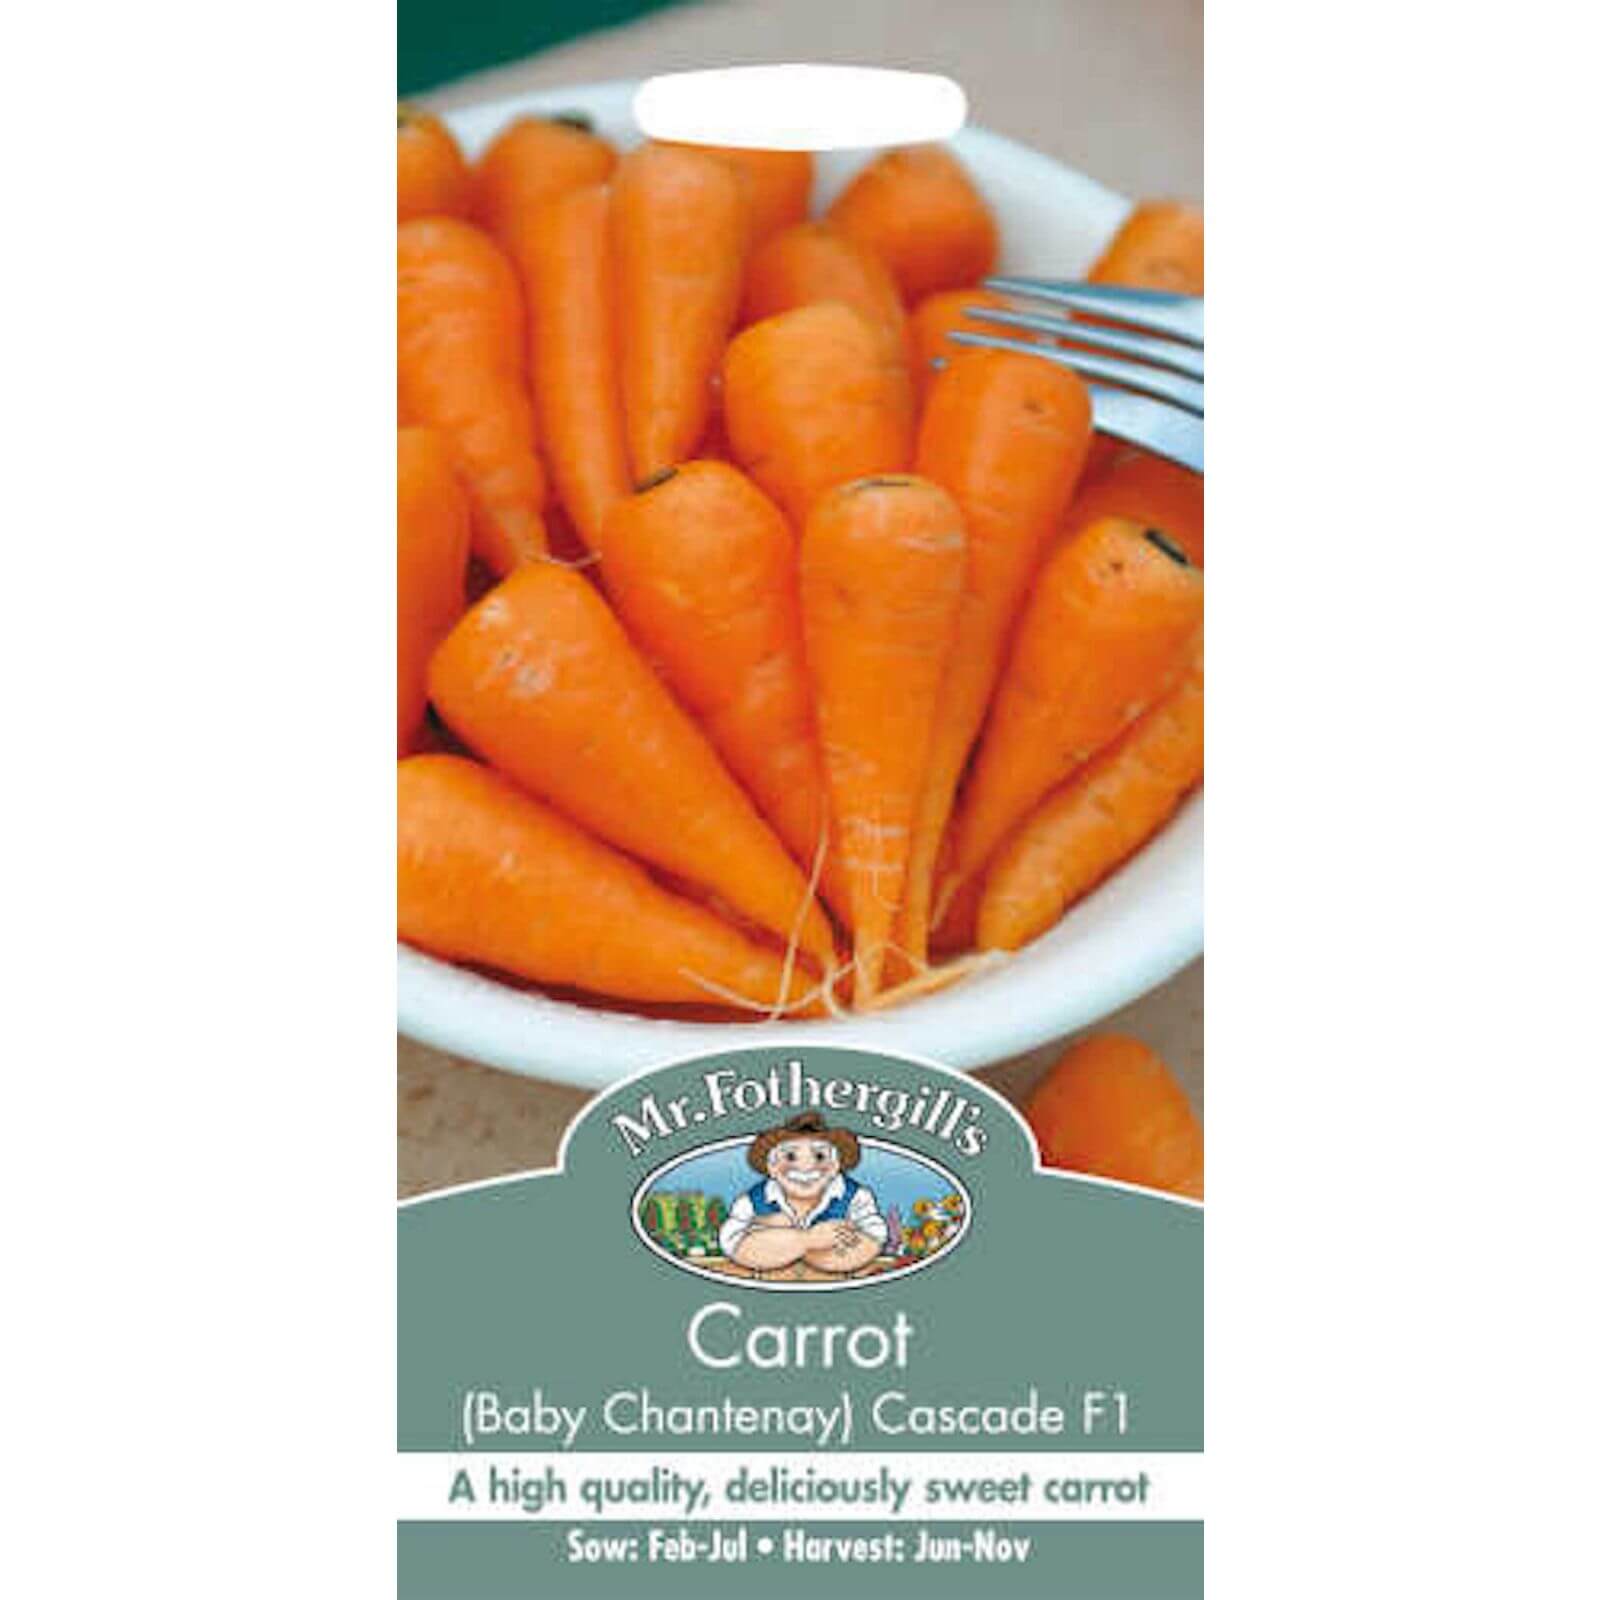 Mr. Fothergill's Carrot Baby Chant Cascade F1